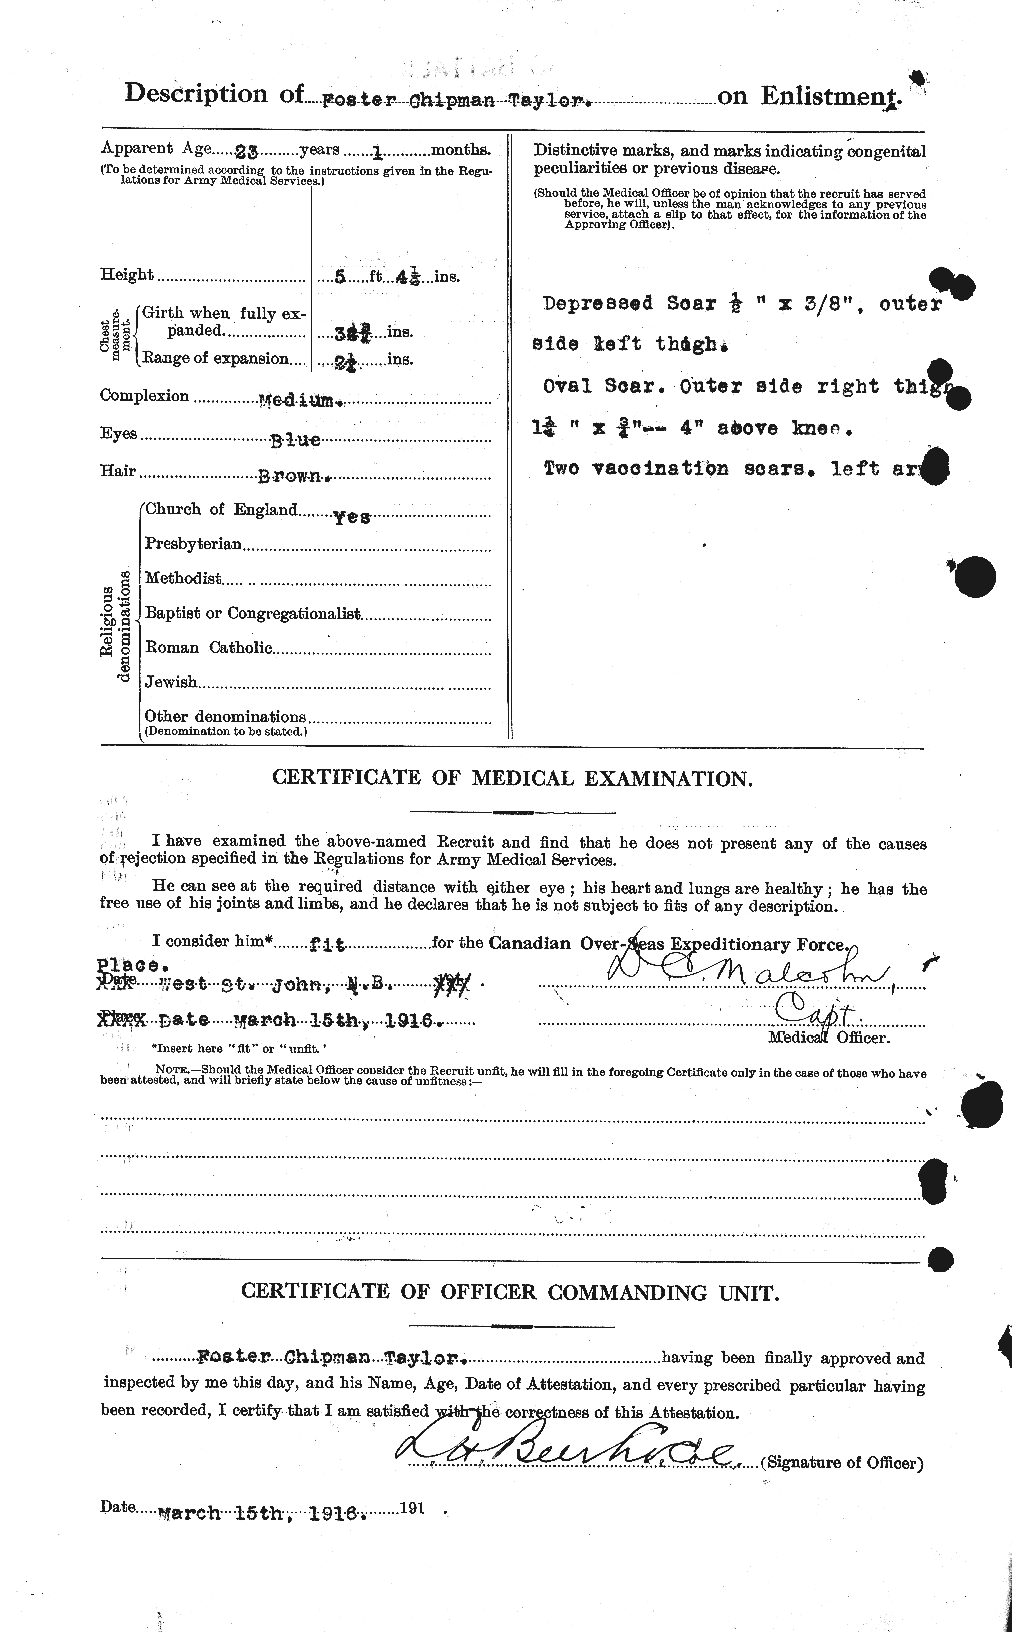 Personnel Records of the First World War - CEF 627418b